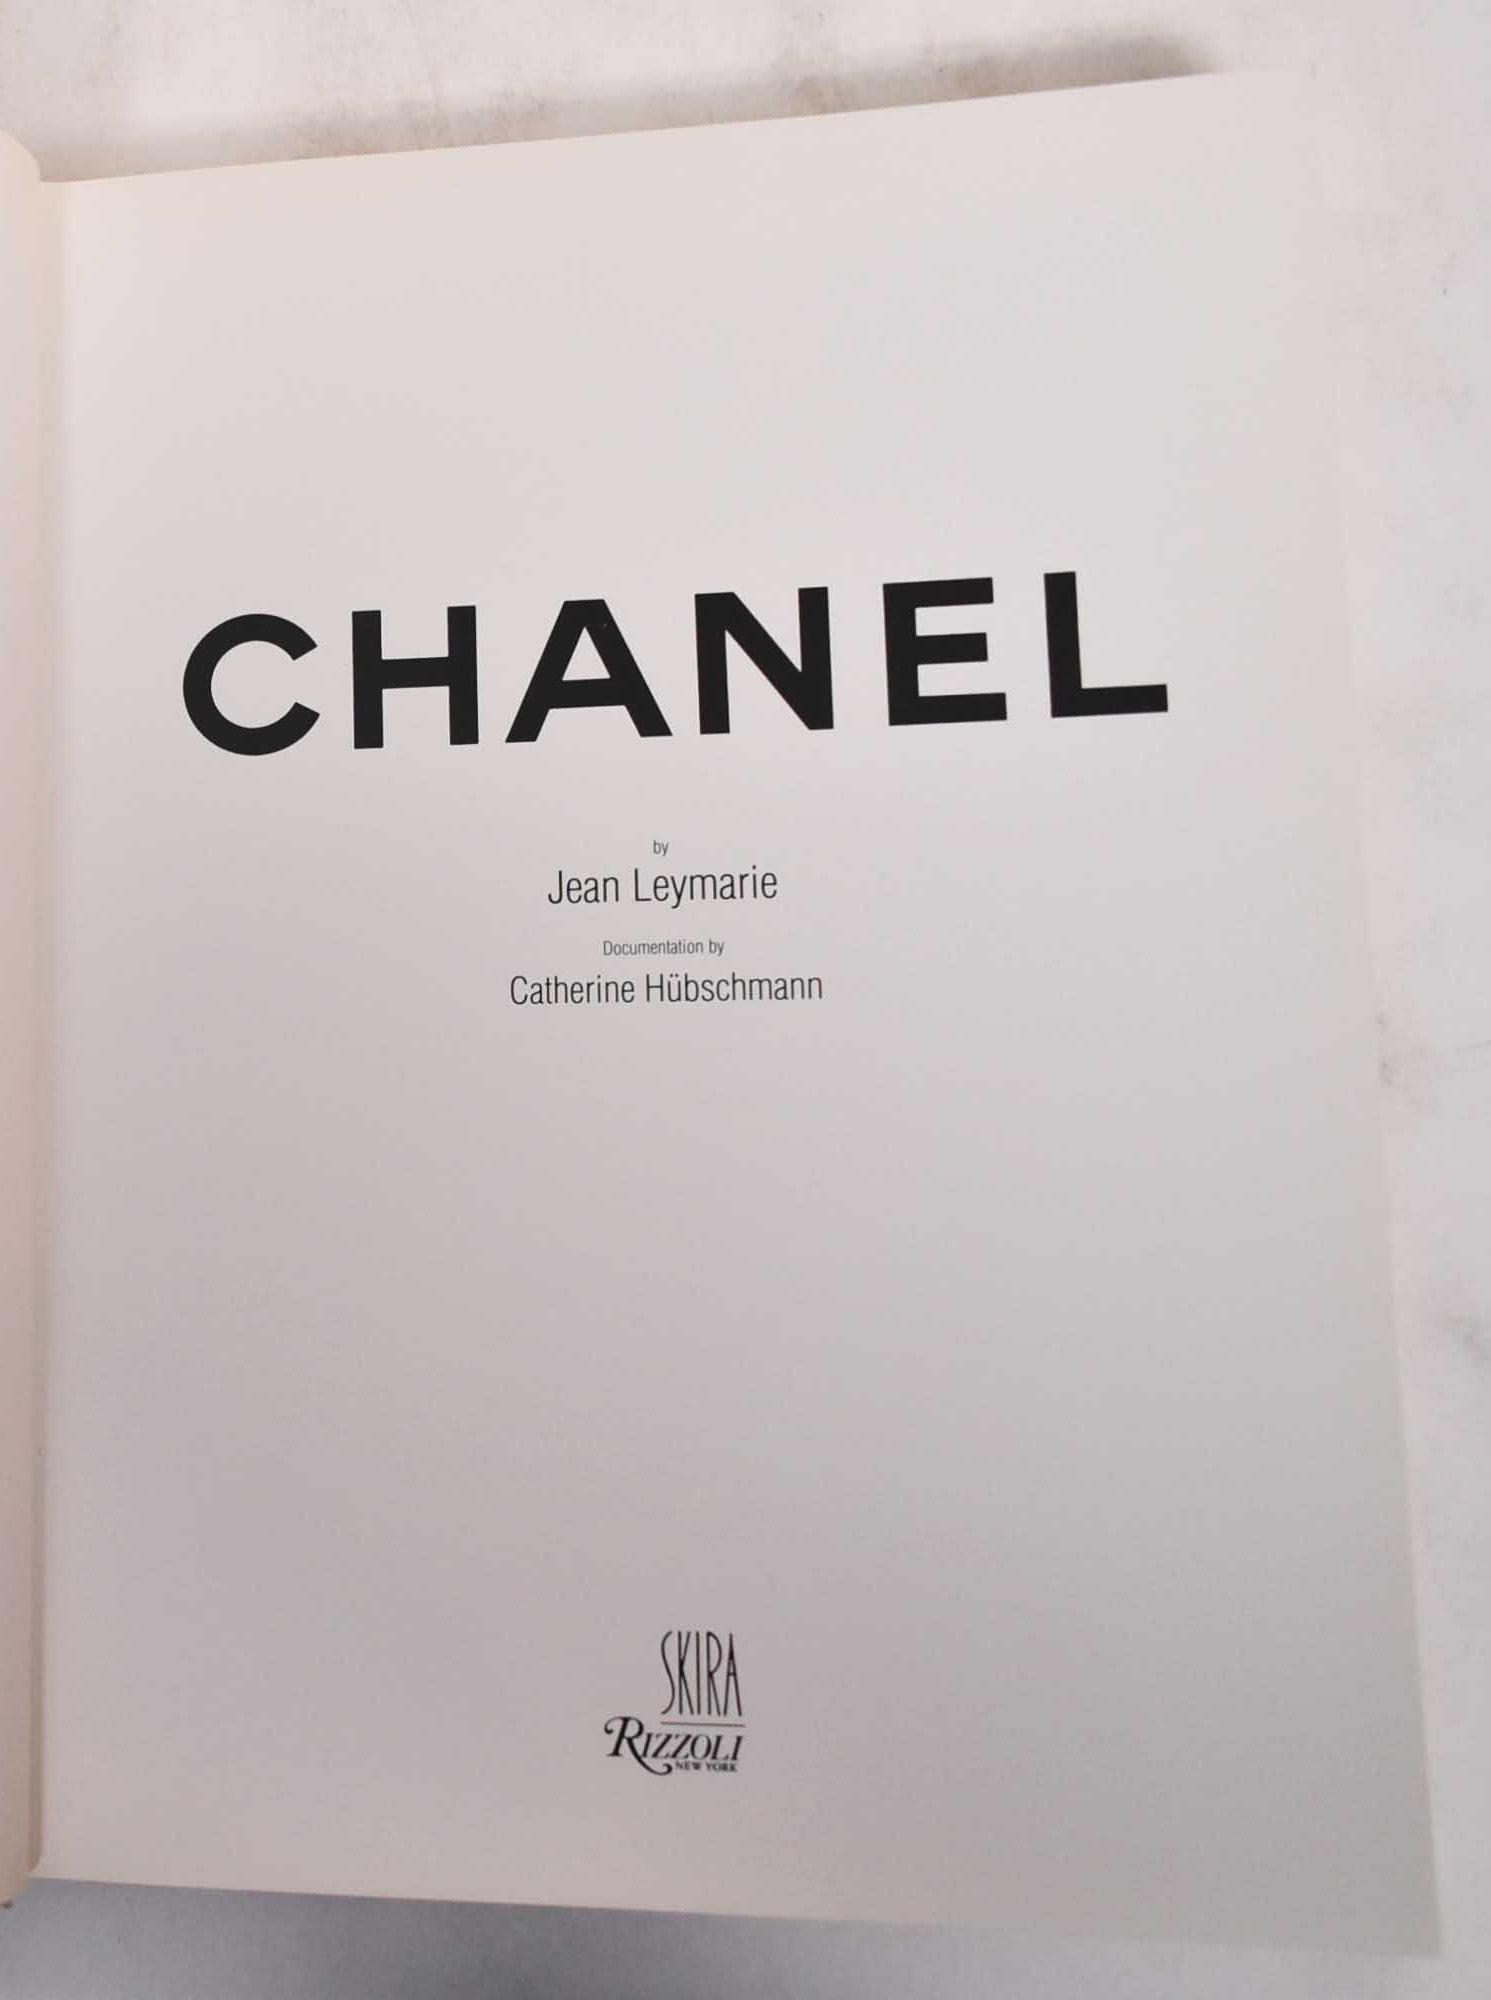 chanel collections and creations by daniele bott